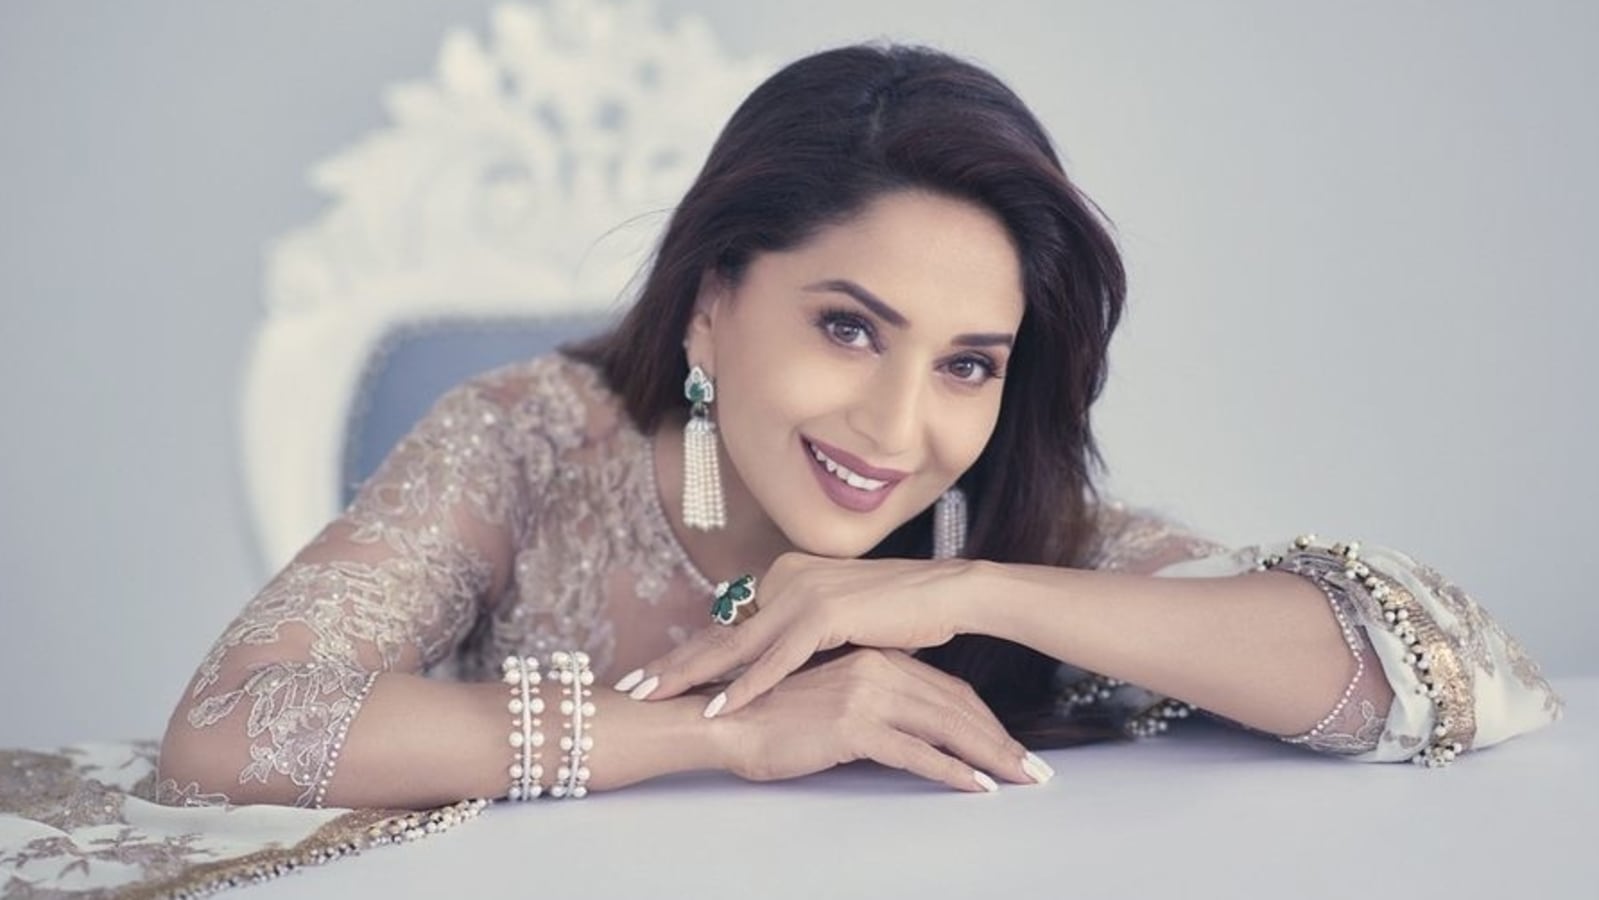 Madhuri Dixit Chudachudi Videos Hd - Madhuri Dixit says 'never stop dreaming' with new photos, Mouni Roy calls  her 'timeless beauty' | Bollywood - Hindustan Times